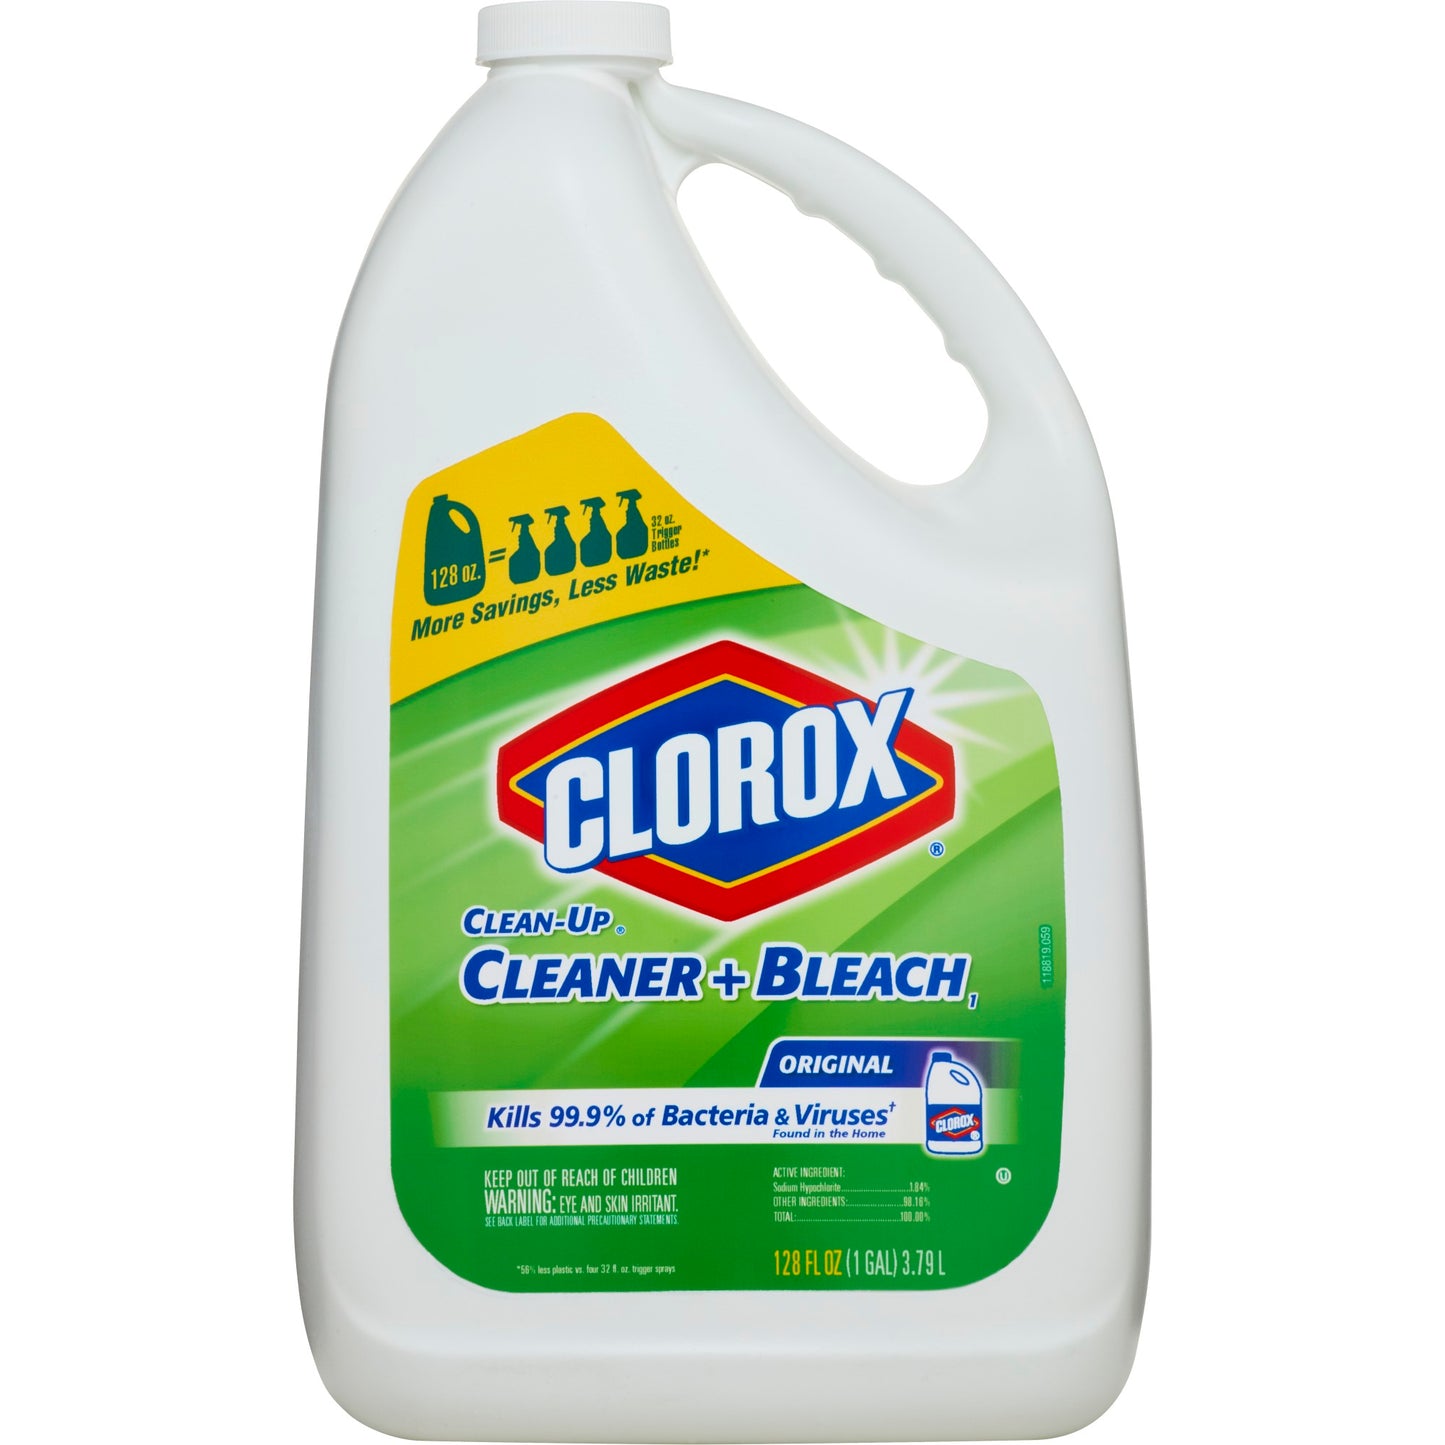 Clorox Clean-Up All Purpose Cleaner with Bleach, Refill Bottle, Original, 128 Ounces